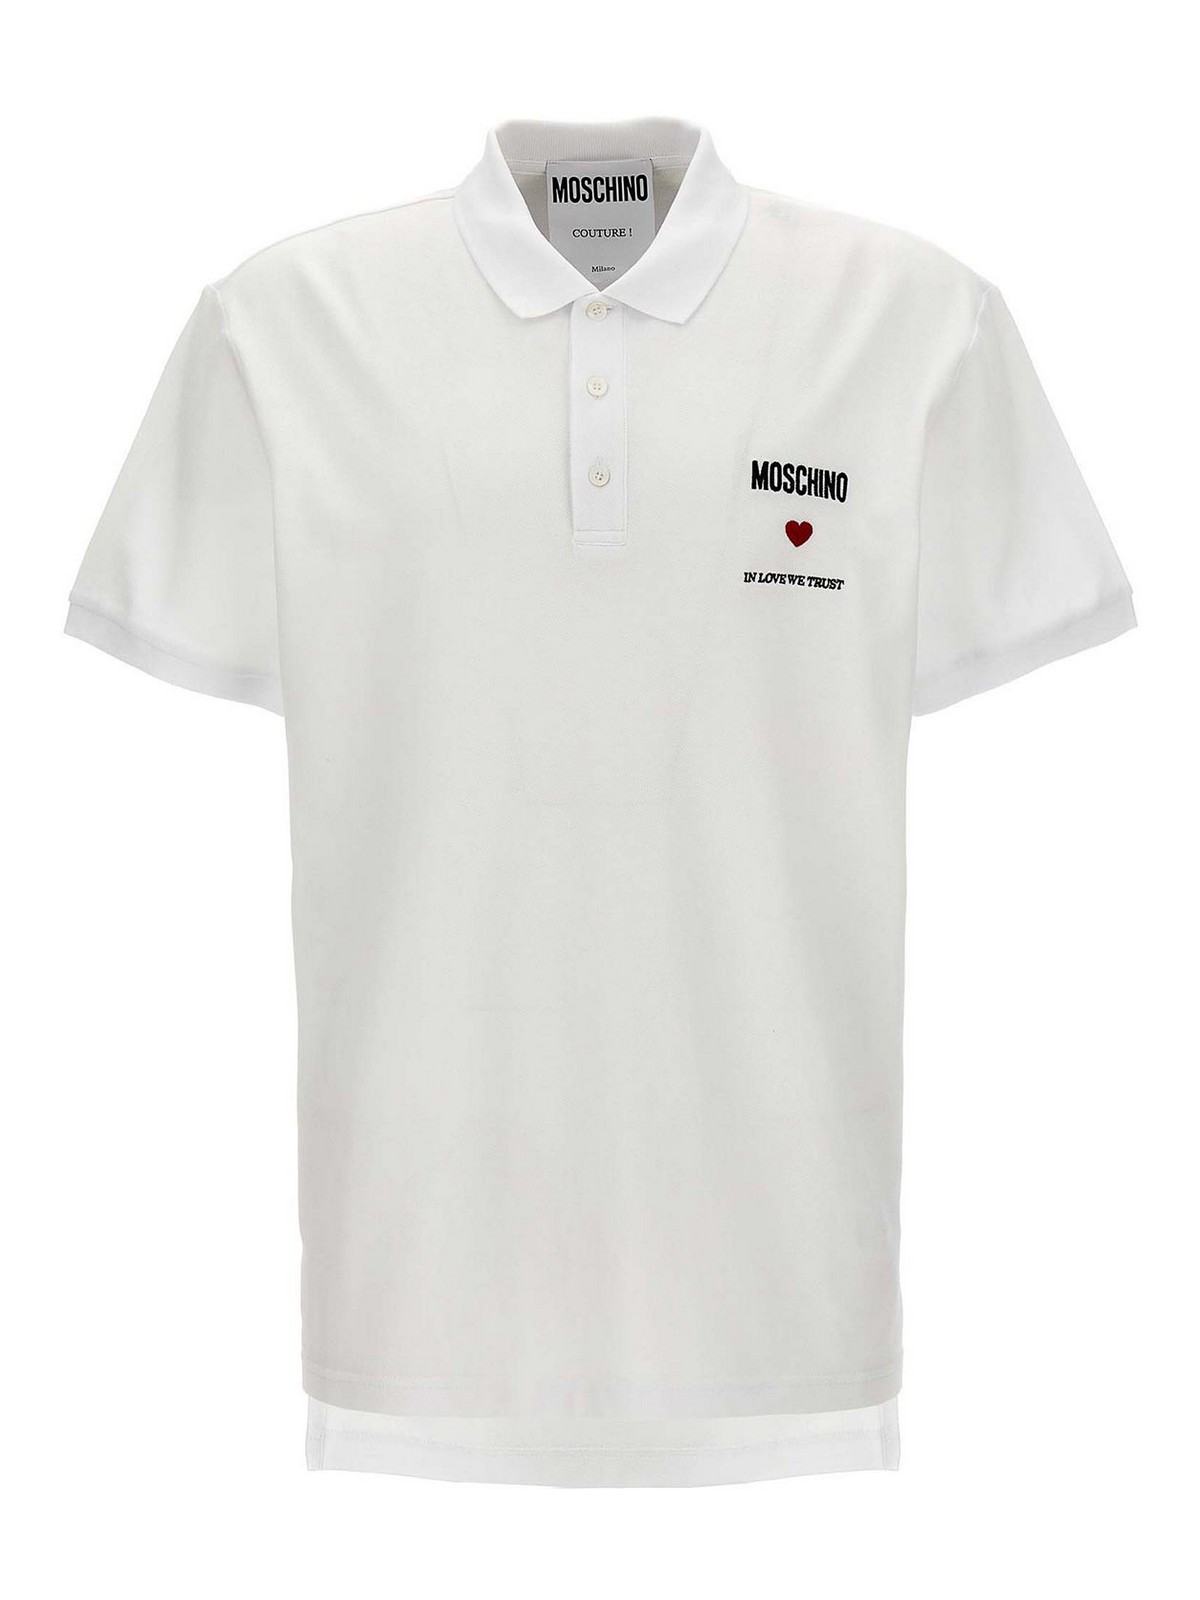 Shop Moschino In Love We Trust Polo Shirt In Blanco